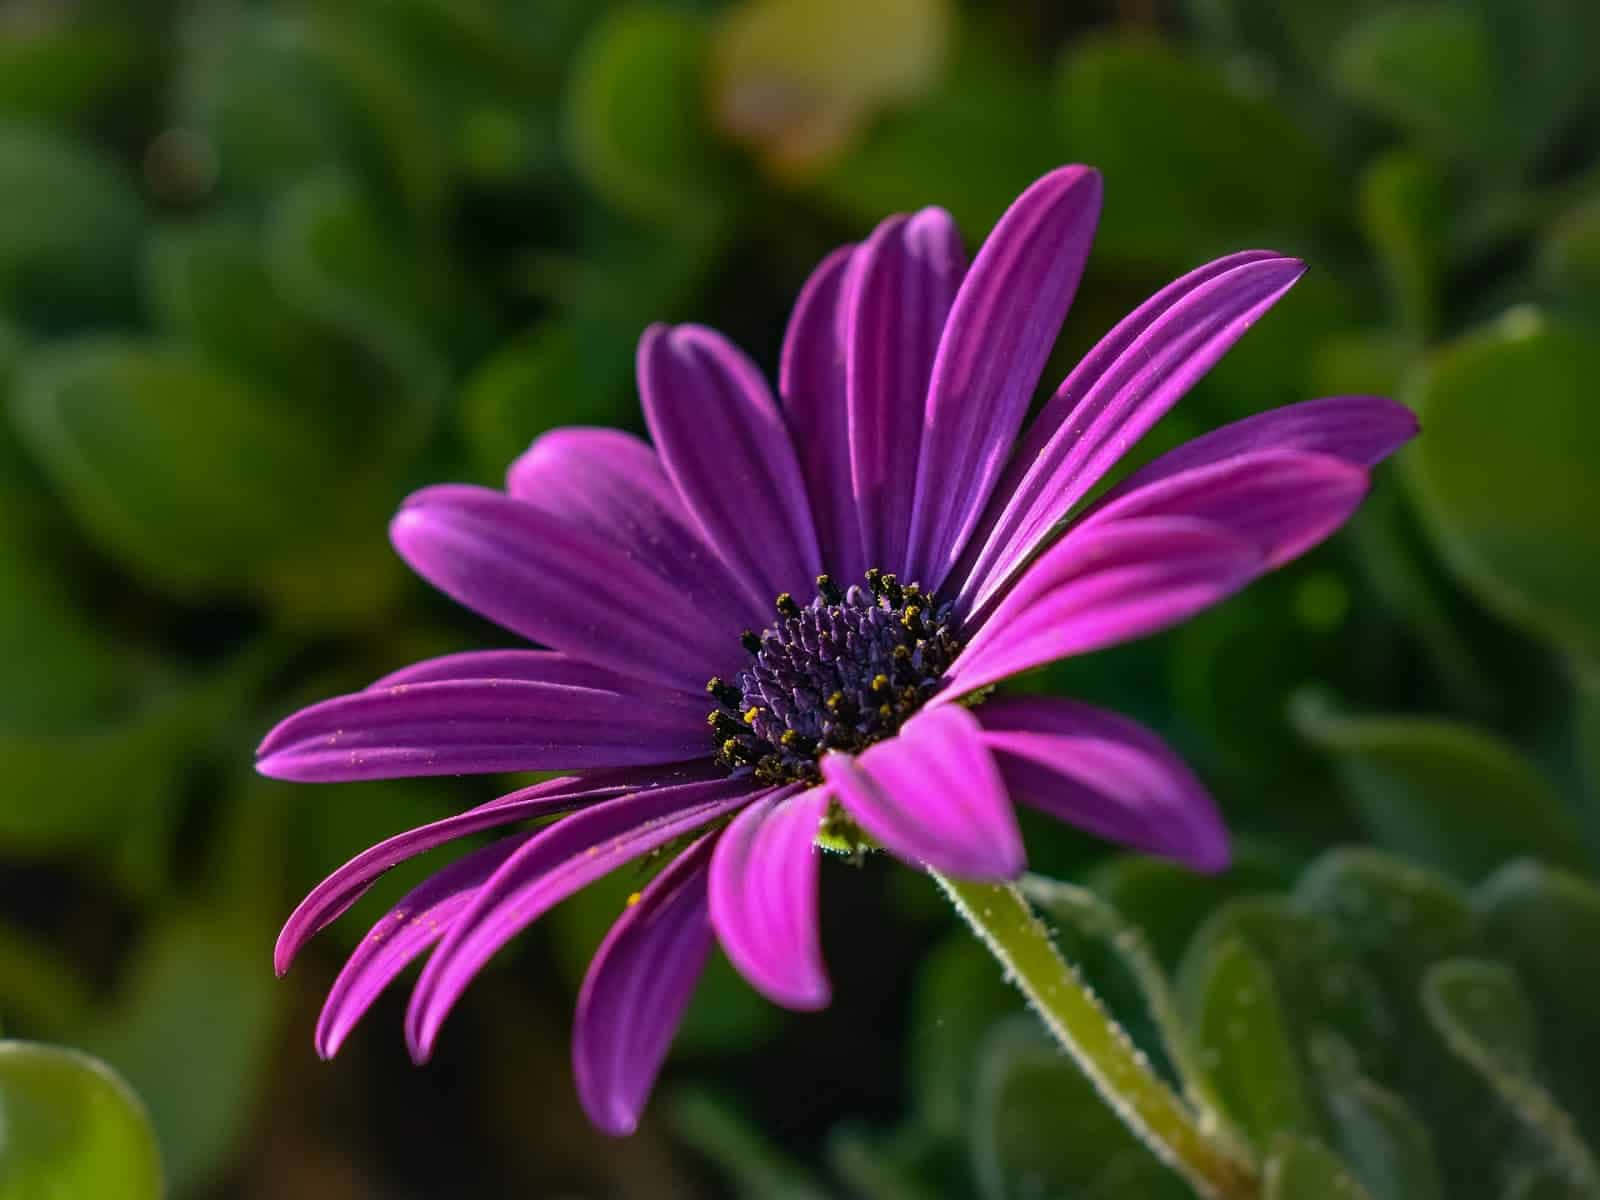 A daisy in profile view with a pink background